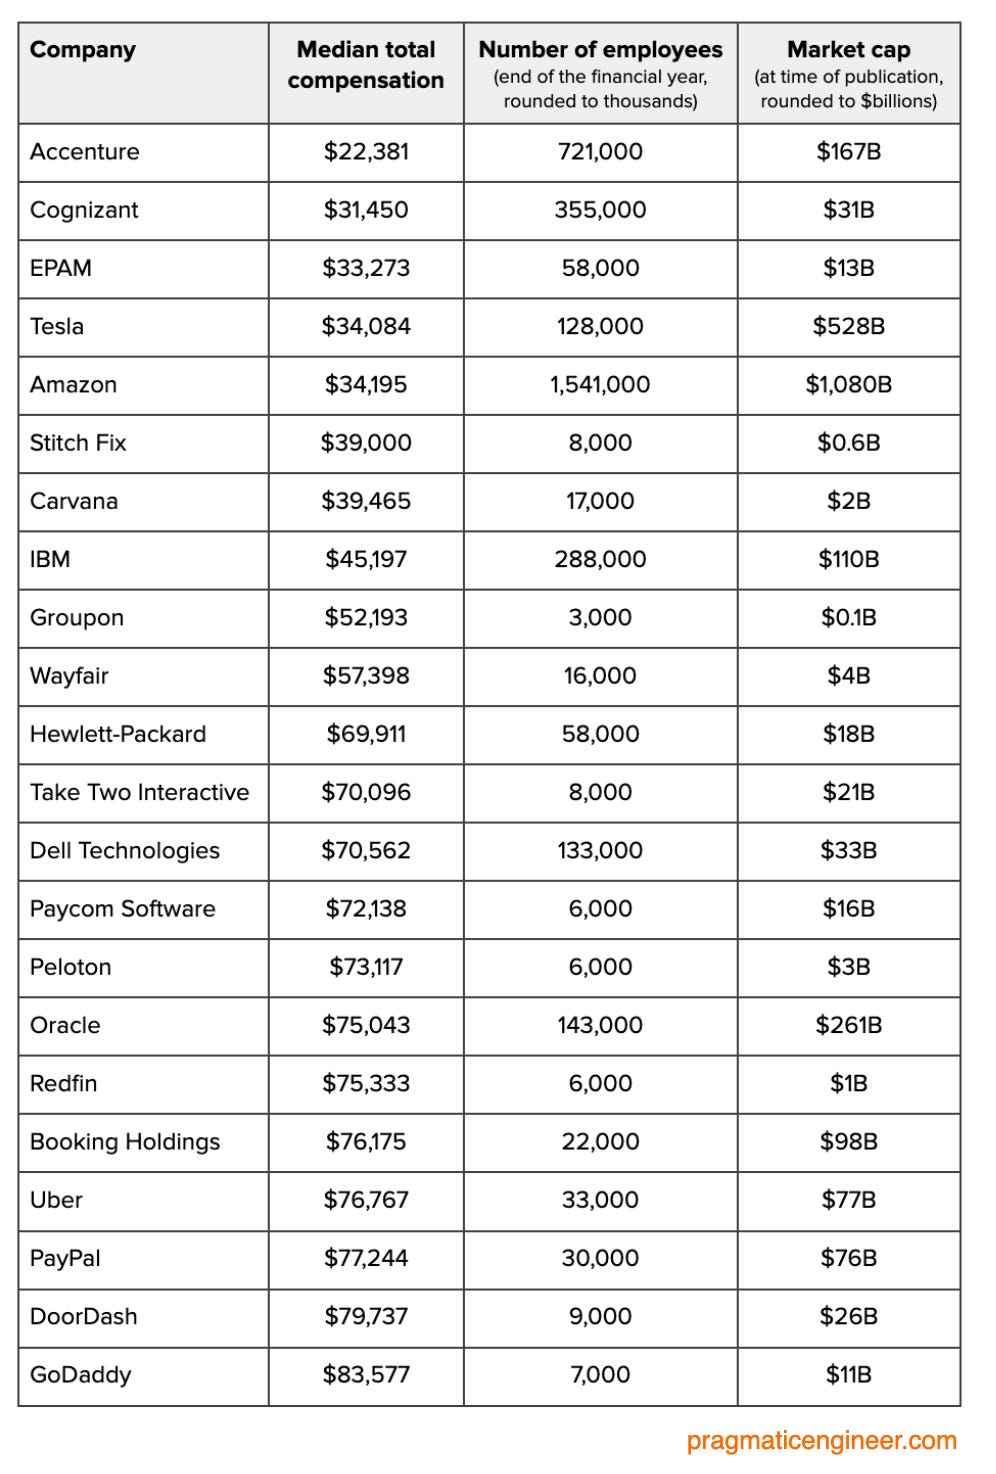 Companies that pay the least, by median compensation